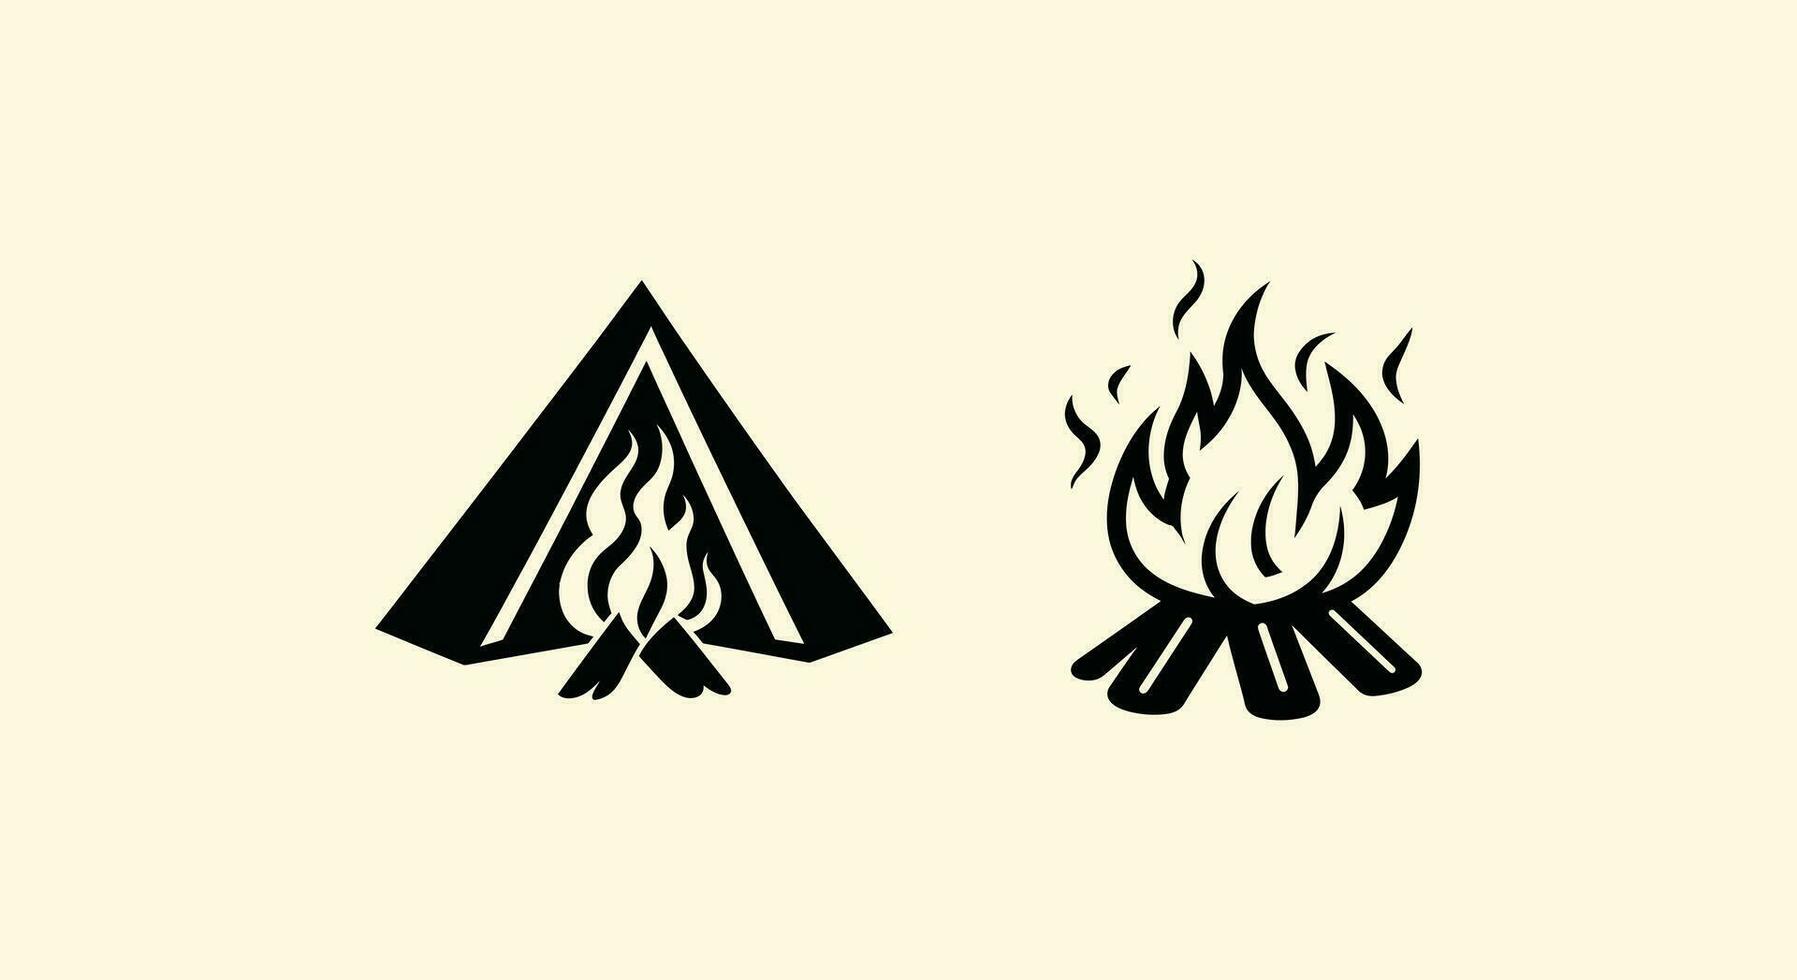 Capture Campfire Dreams with Vector Elements  Perfect for Outdoor and Camping Concepts.